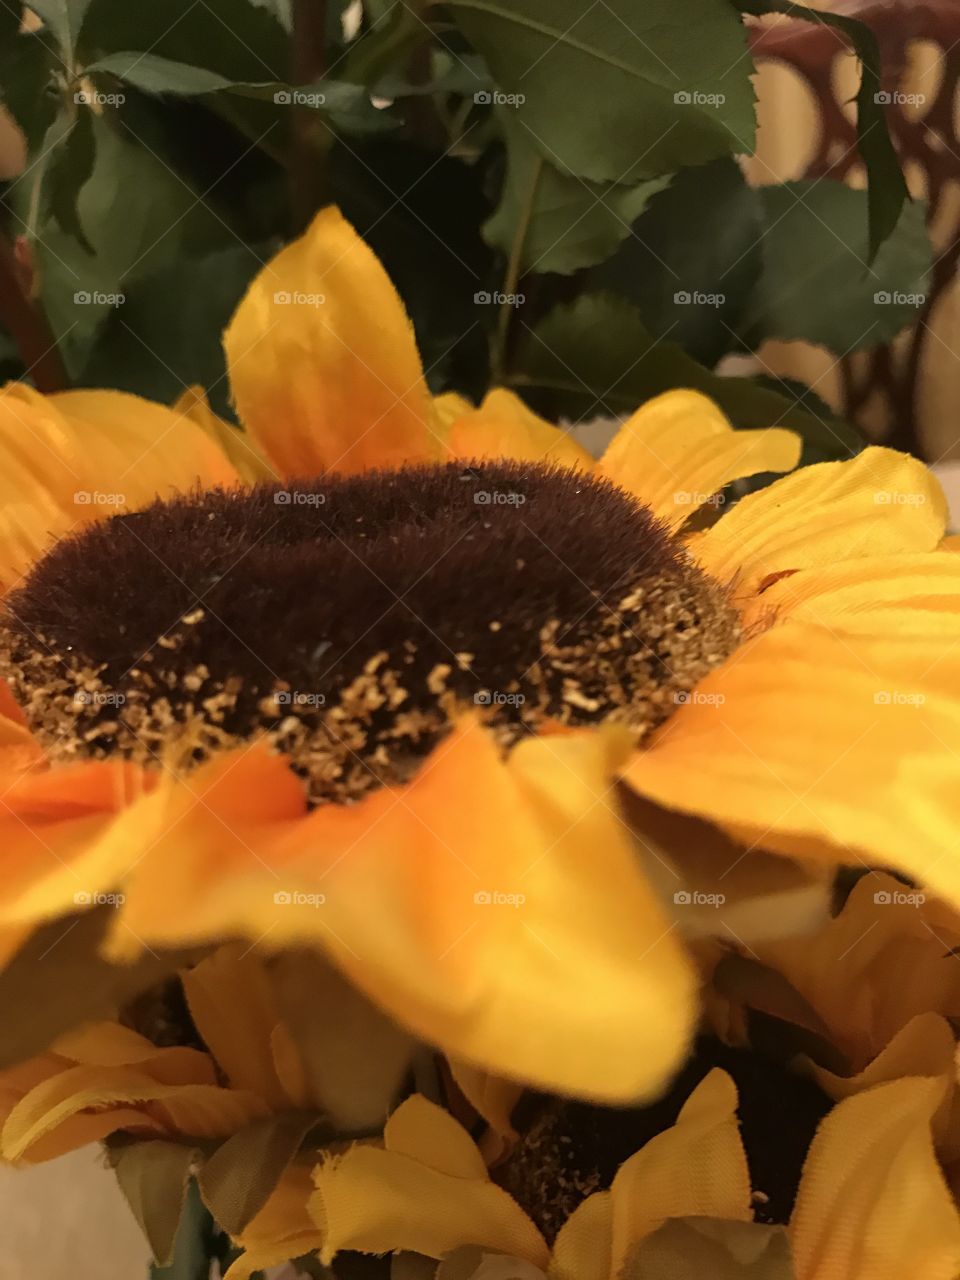 Sunflower, thousands of tiny dots surrounded by yellow petals.